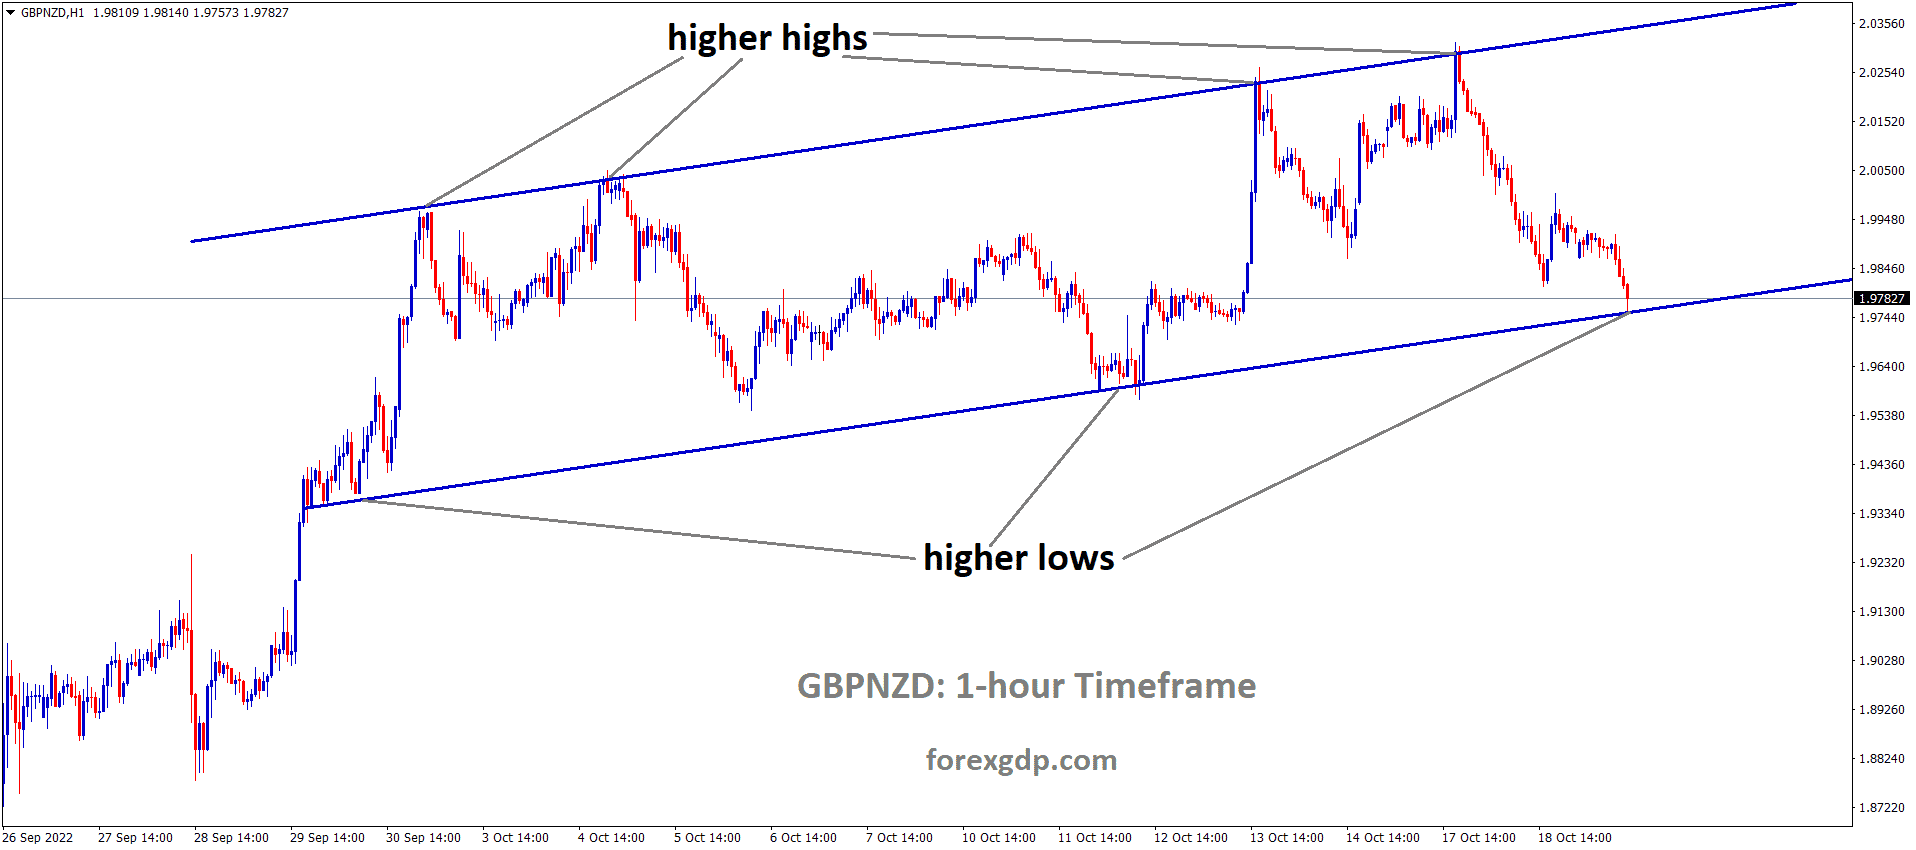 GBPNZD is moving in an Ascending channel and the market has reached the higher low area of the channel